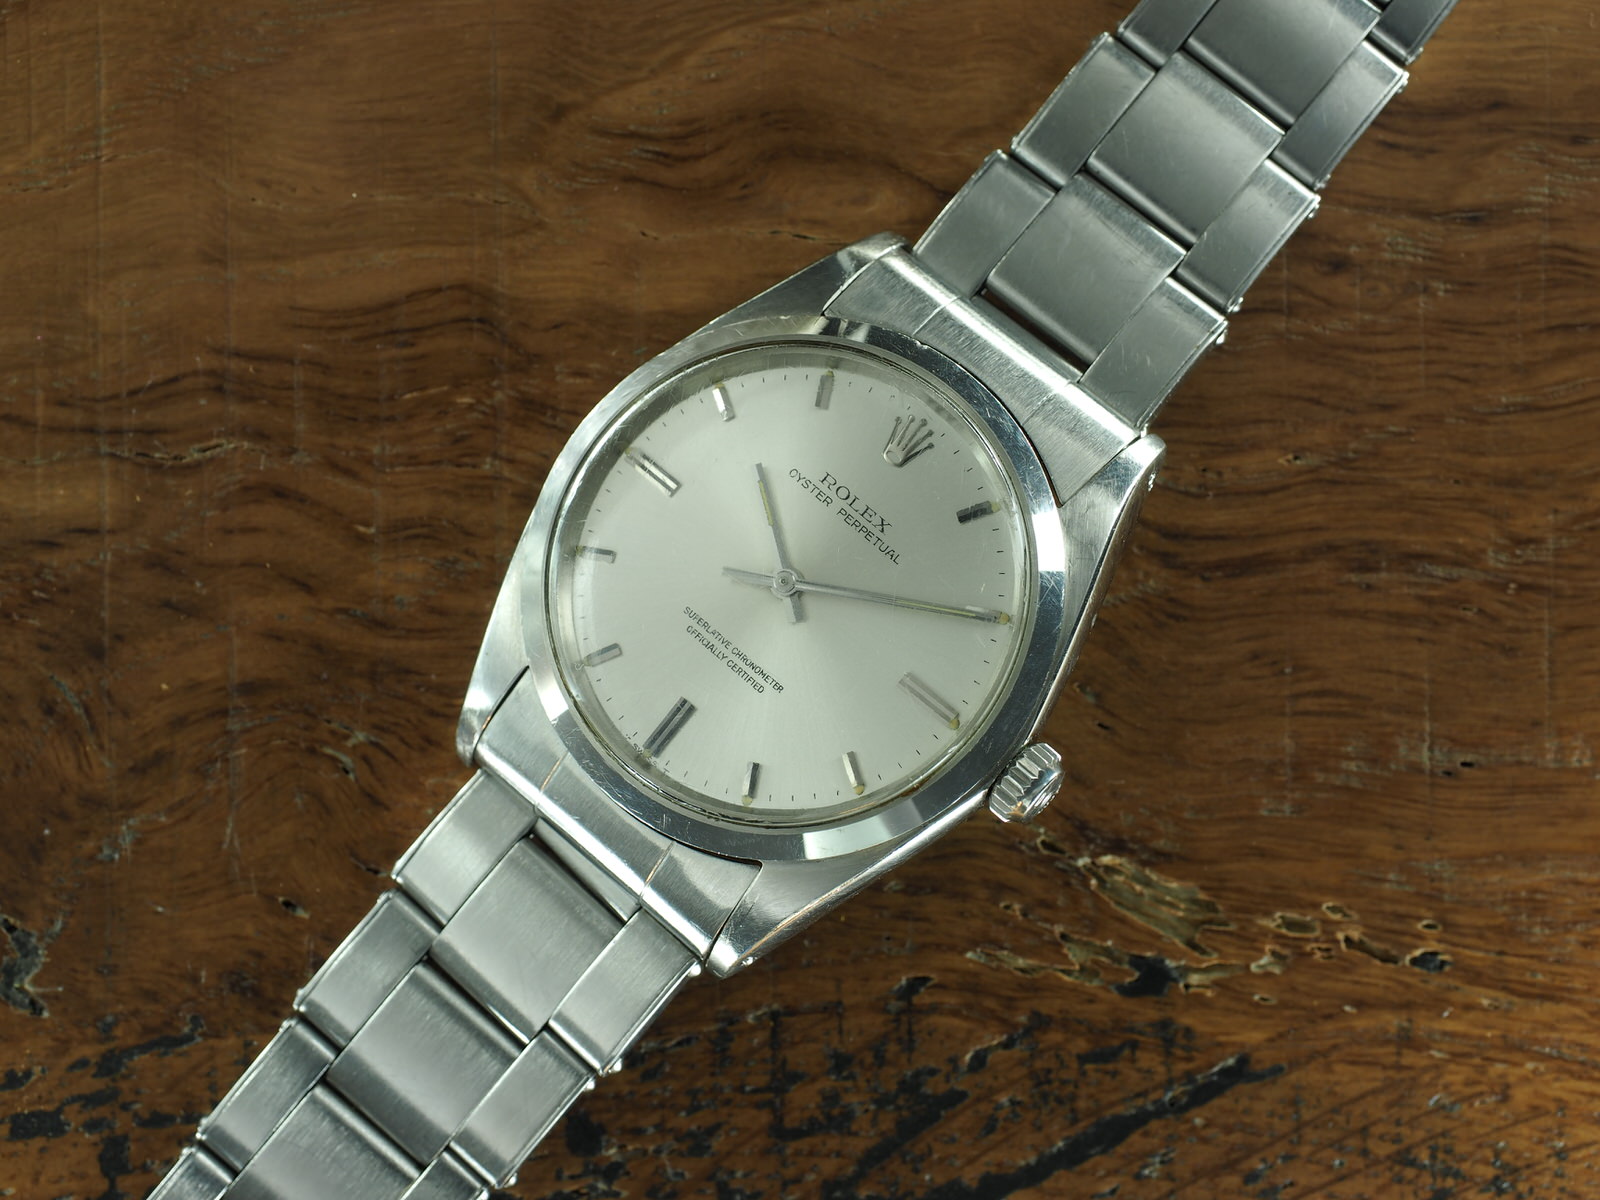 Rolex Jumbo Oyster Perpetual Ref. 1018 